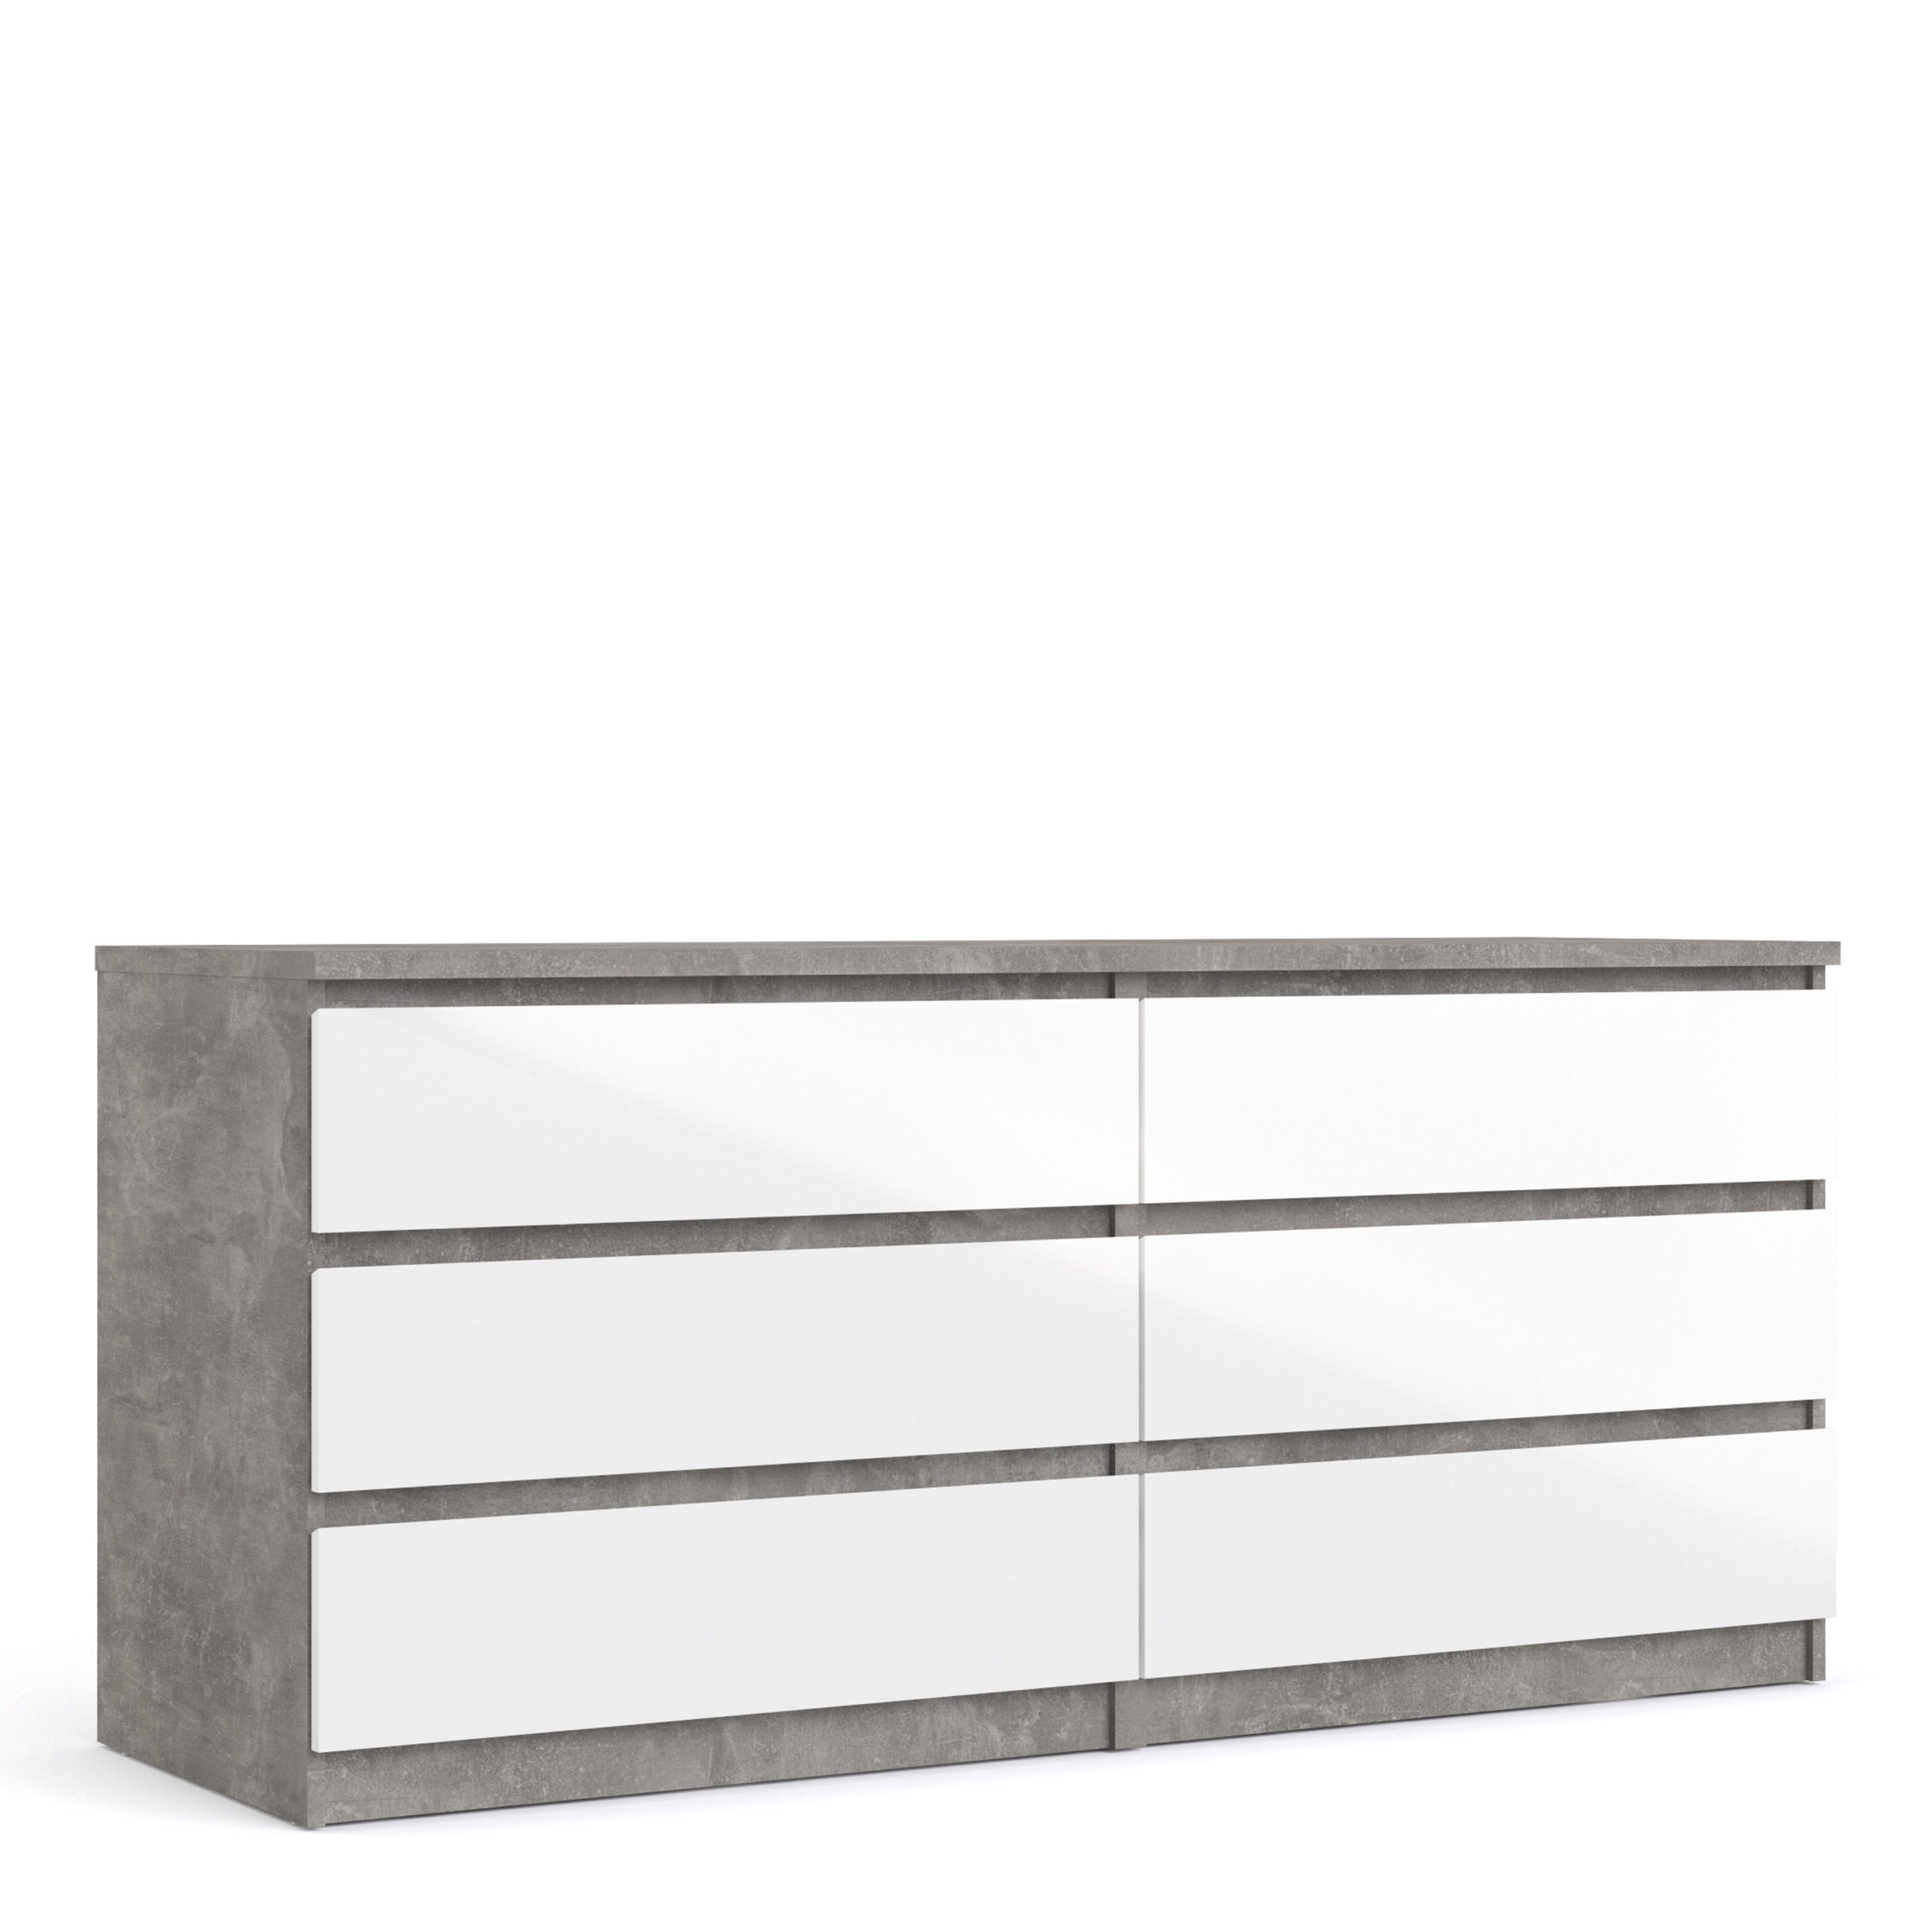 Moderno Wide Chest of 6 Drawers   Concrete and White High Gloss   Self Assembly